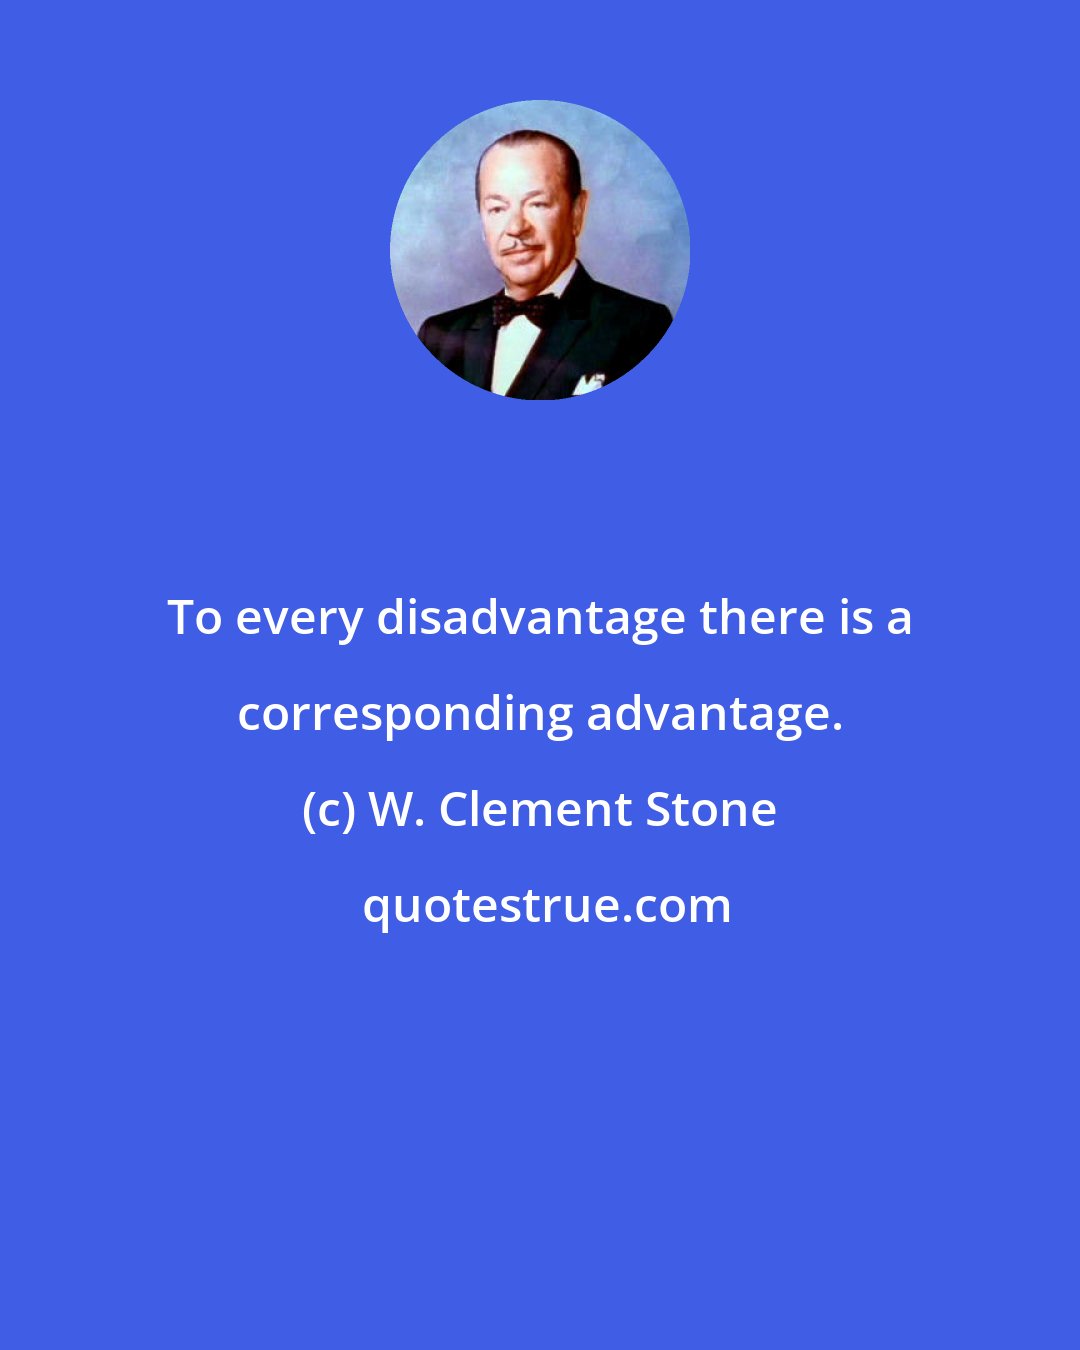 W. Clement Stone: To every disadvantage there is a corresponding advantage.